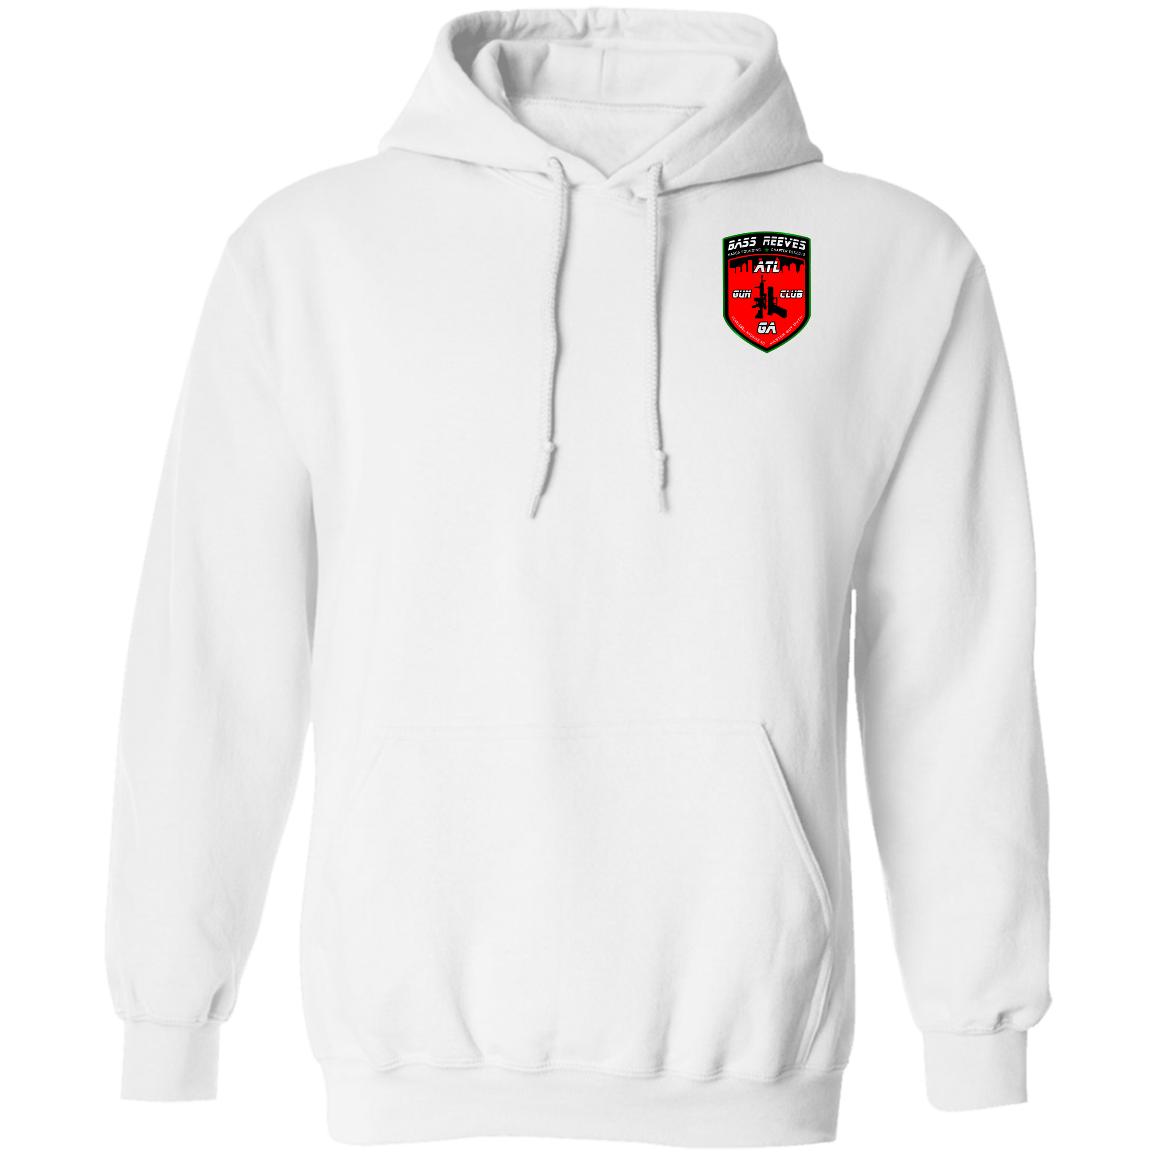 BRGC Small Patch Pullover Hoodie